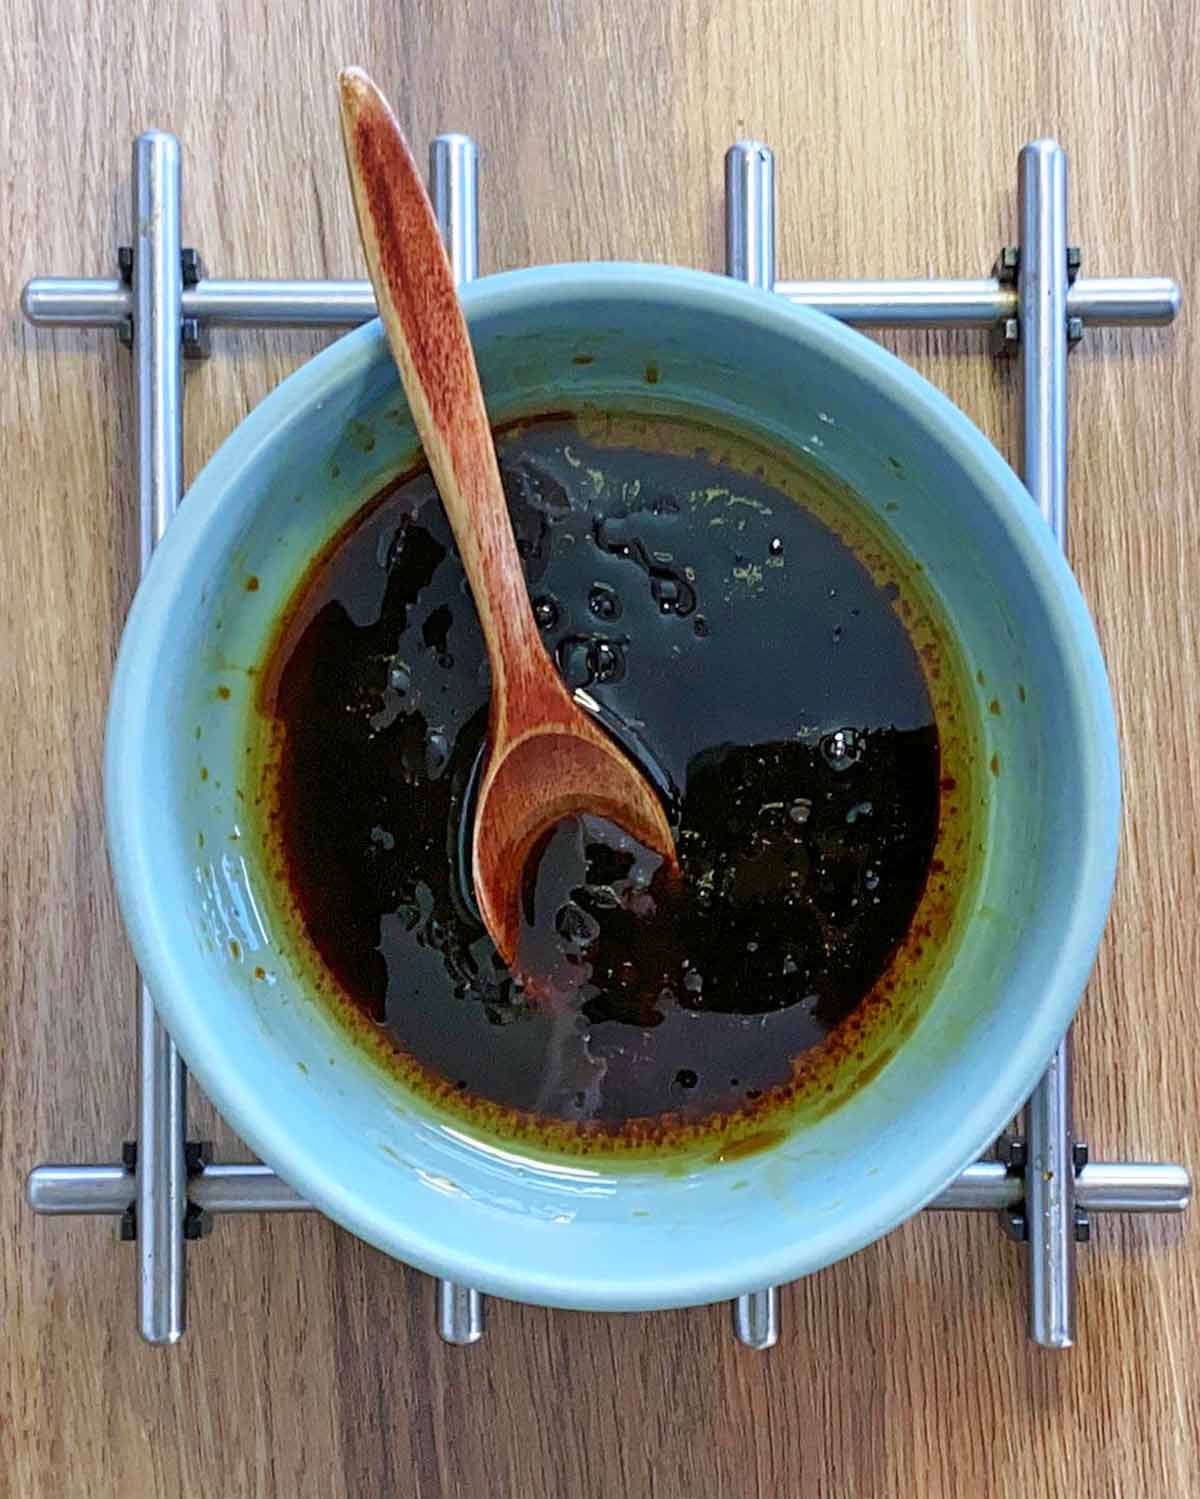 A bowl of soy sauce based marinade.